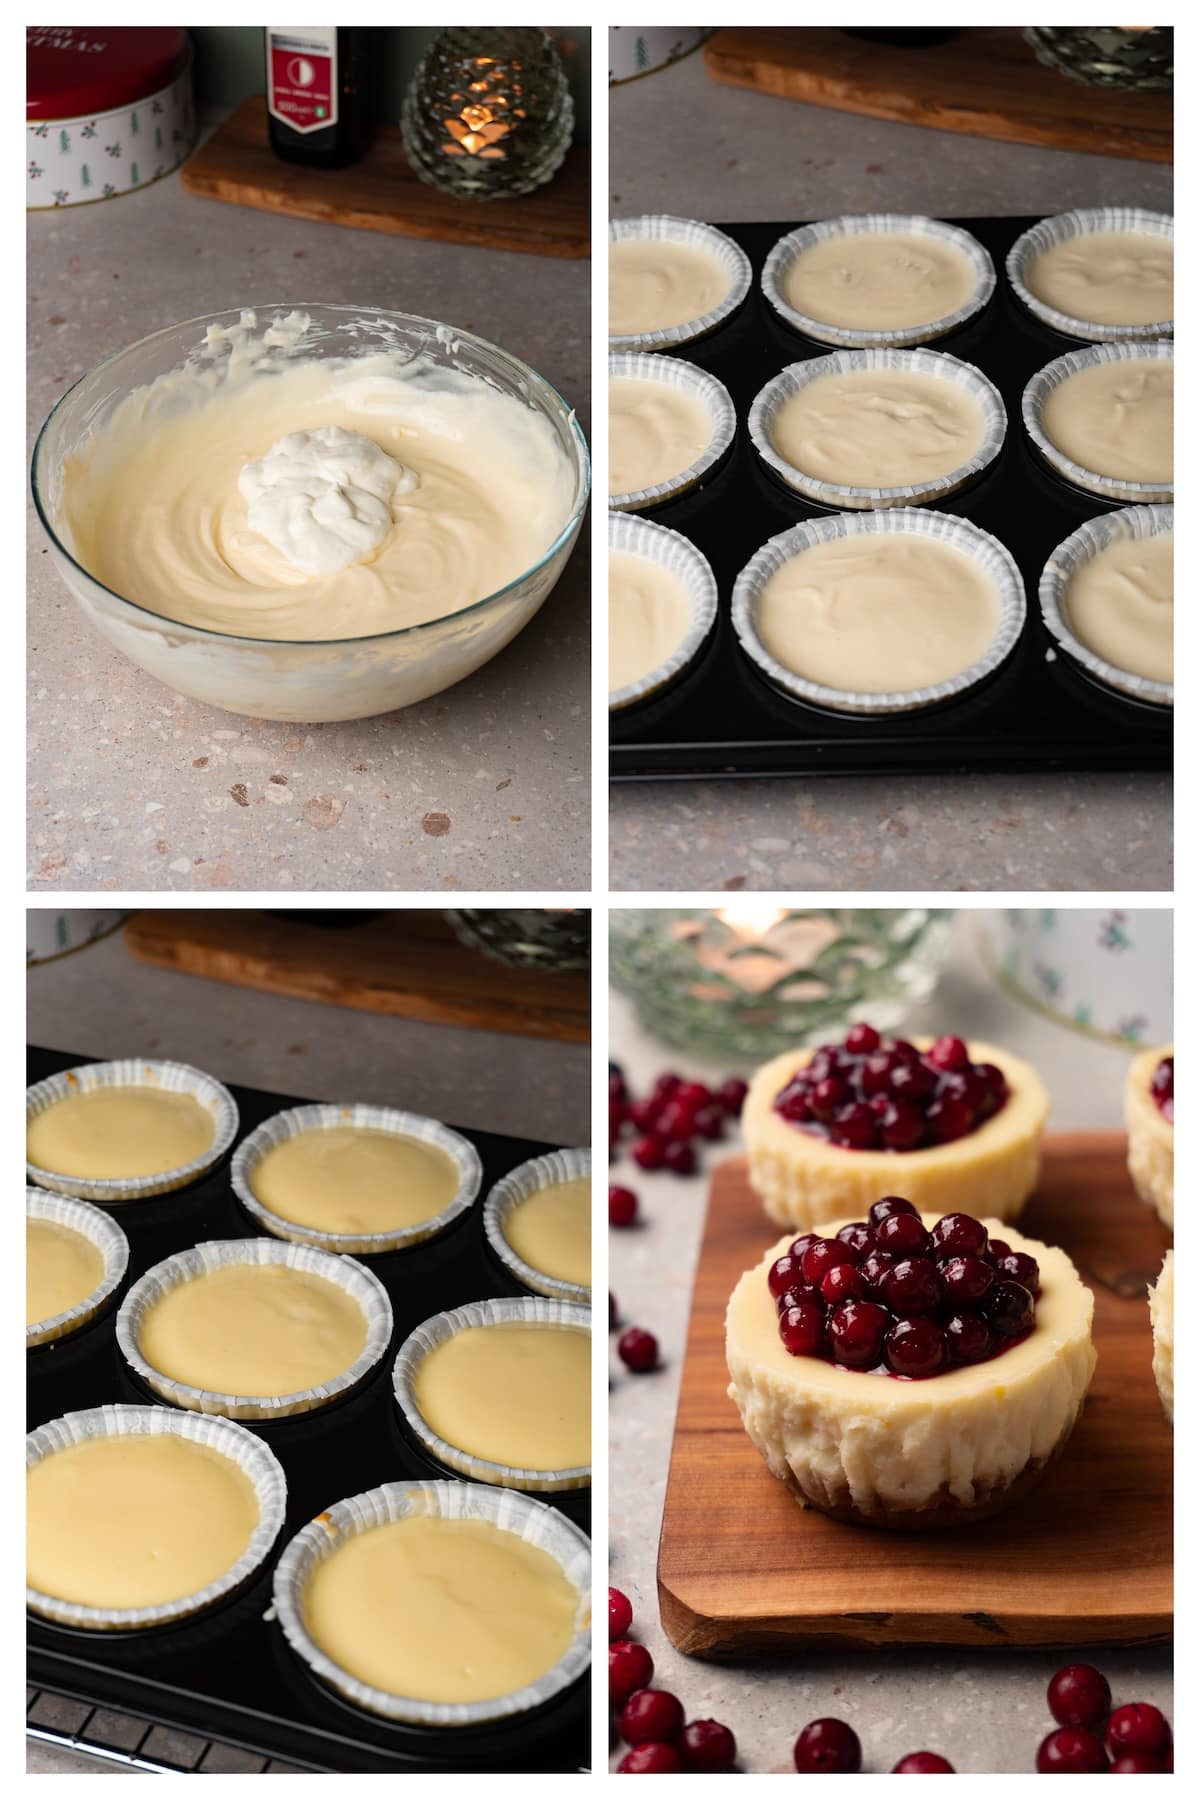 A collage image shows how to bake mini cheesecakes and decorate them with cranberry jam in 4 steps.